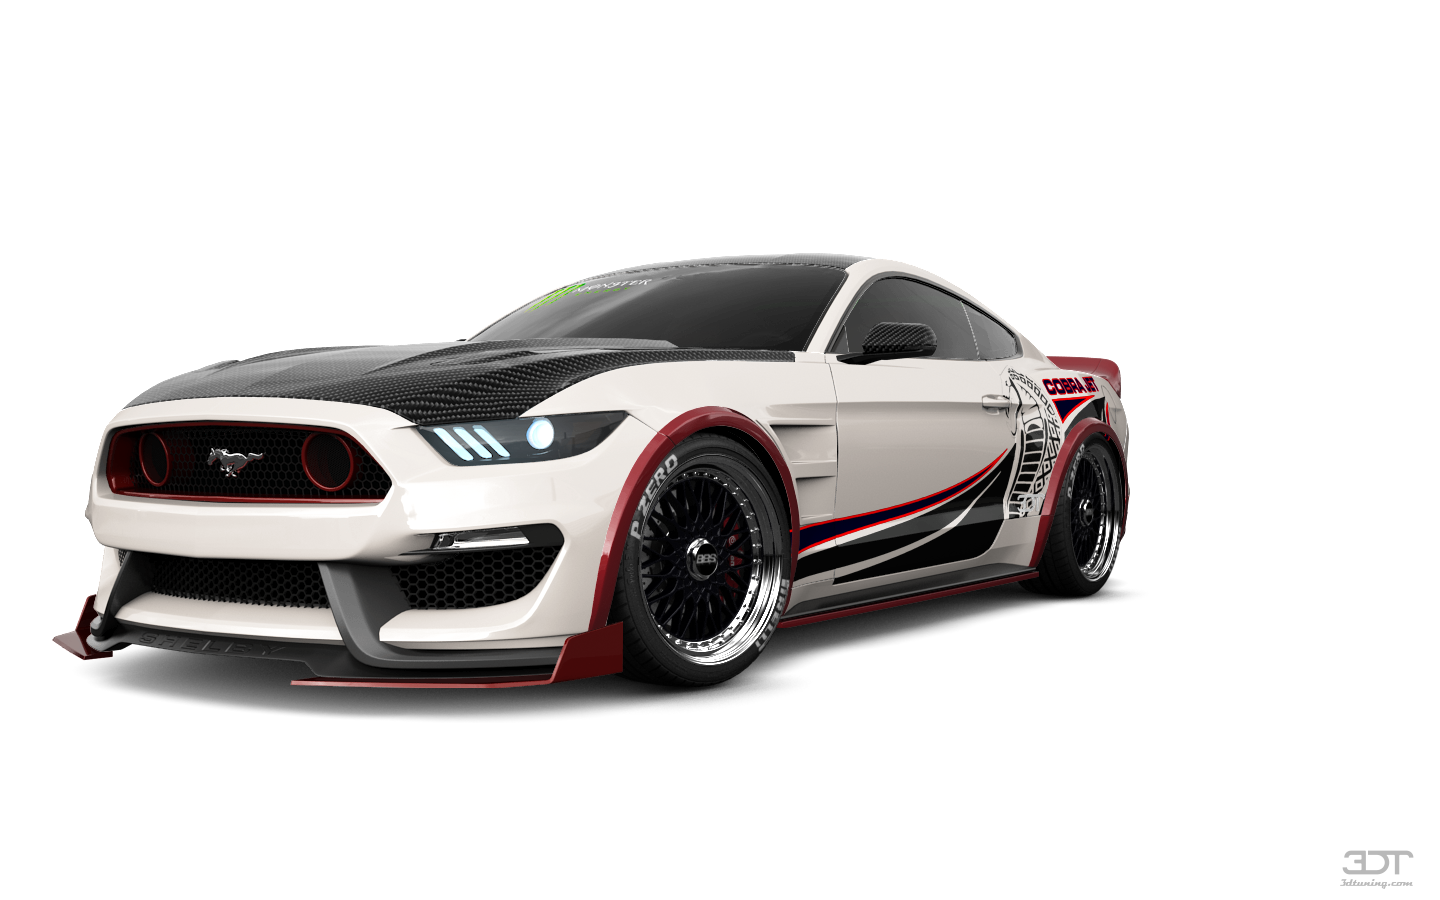 Muscle Cars Gt Xy Ford Wallpapers